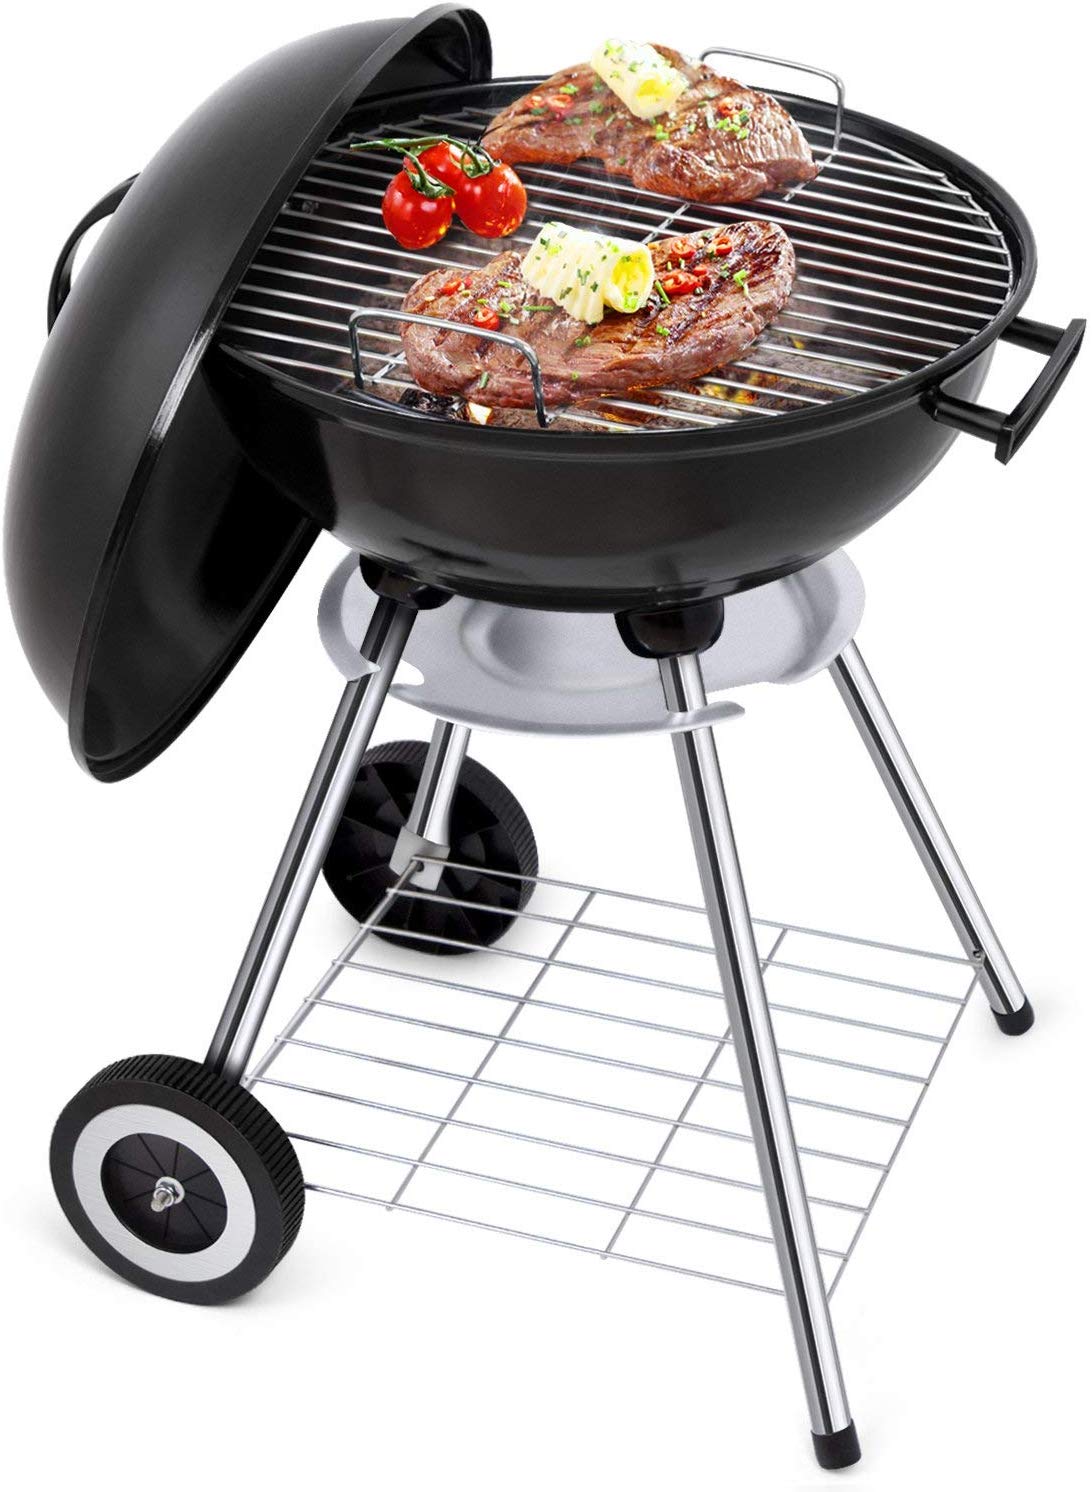 Portable Charcoal Grill for Outdoor Grilling - House Style